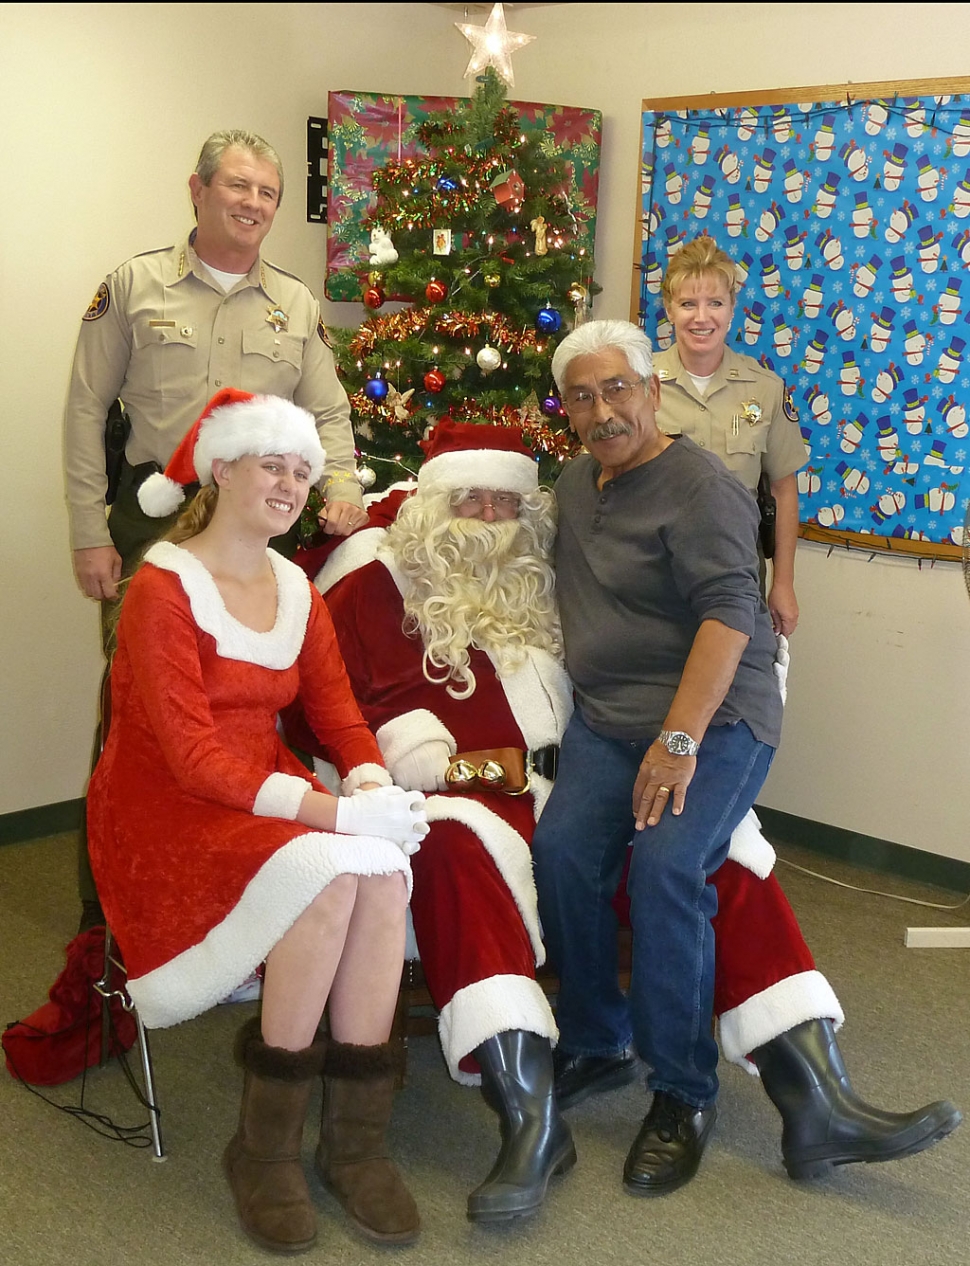 Christmas at he Fillmore Police Storefront Tuesday brought out the child in all who were there. Pictured (standing left) is Sheriff Geoff Dean, Santa and his helper, Community Resource Officer Max Pina, and Fillmore Capt. Monica McGrath.